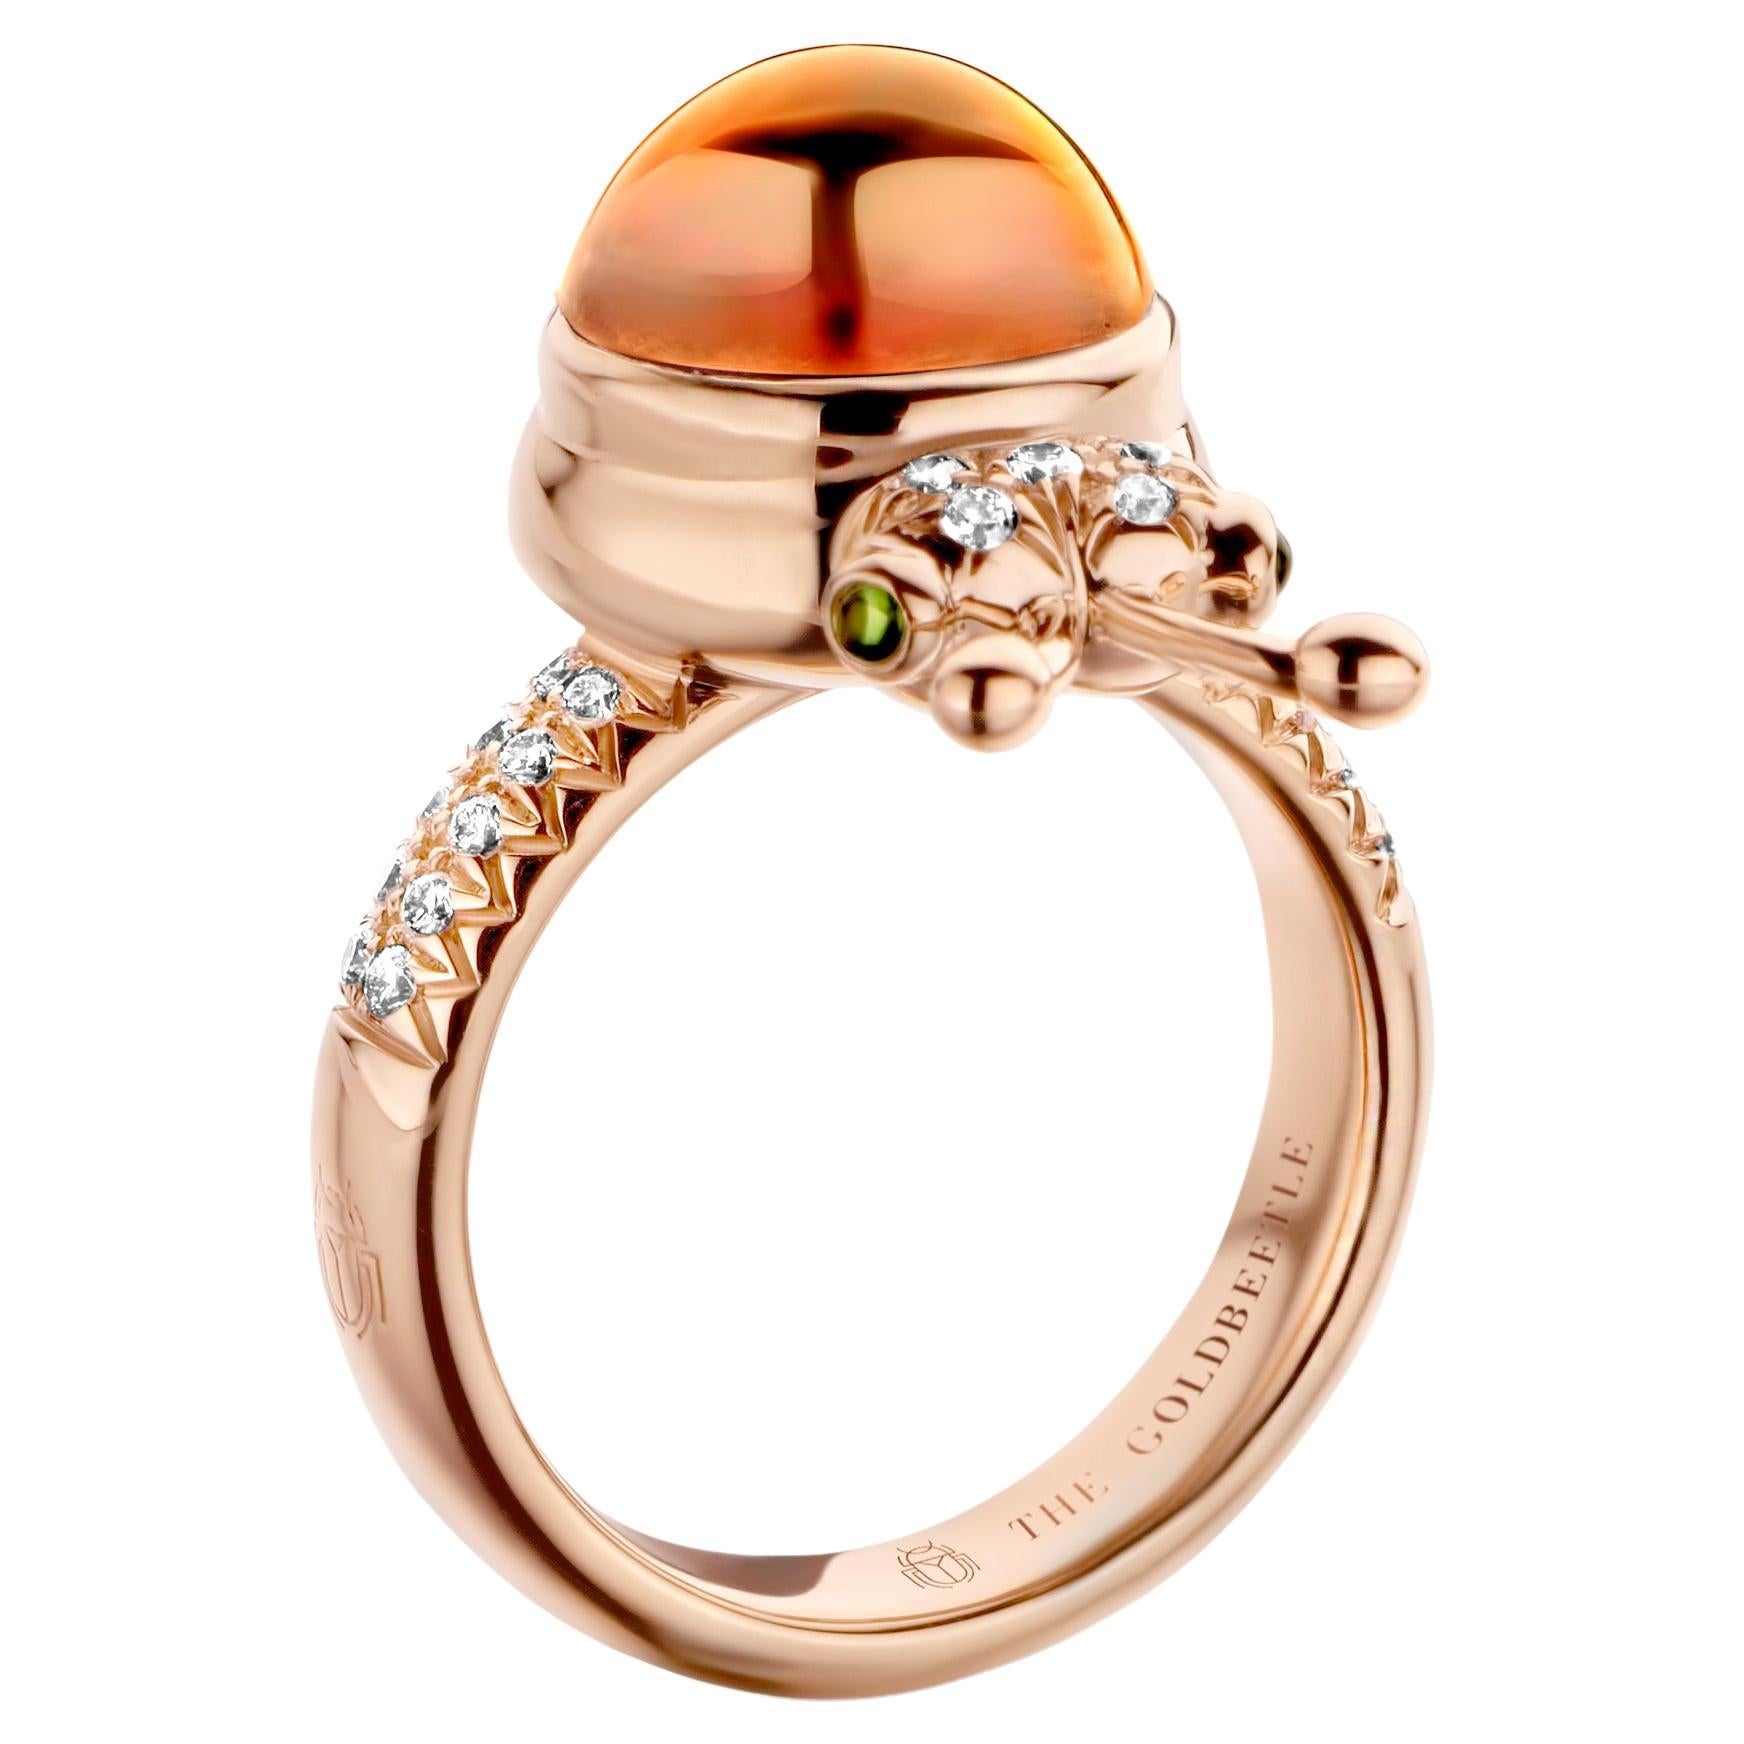 One-of-a-kind lucky beetle ring in 18 Karat rose gold 10g set with the finest natural diamonds in brilliant cut 0,23 Carat (VVS/DEF quality) one natural, mandarin garnet in round cabochon cut 6,00 Carat and two tsavorites in round cabochon cut.